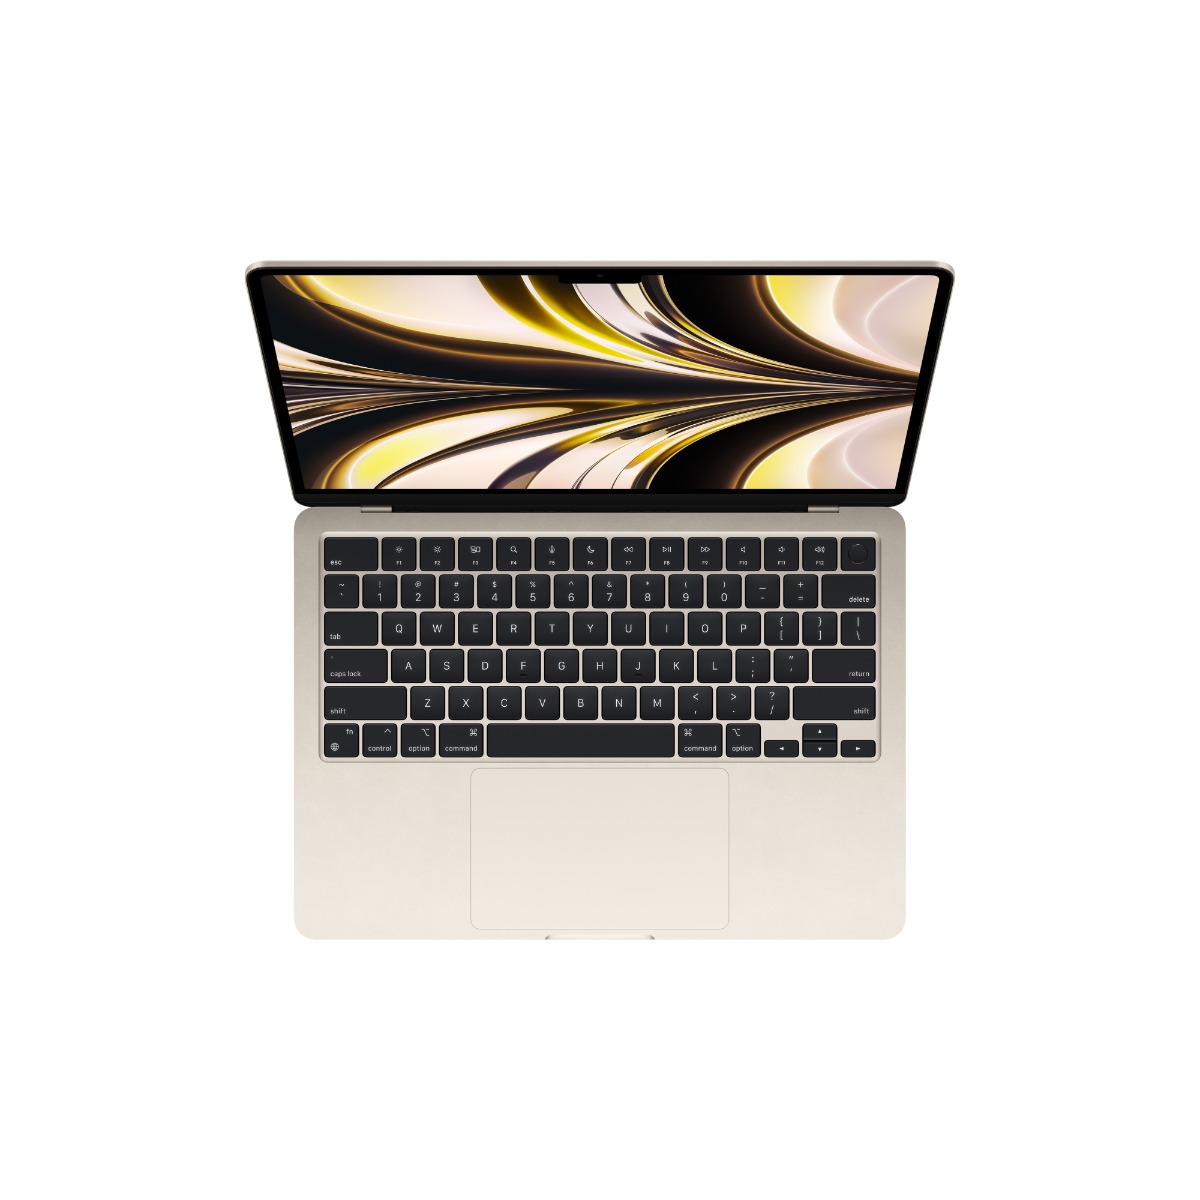 13-inch MacBook Air: Apple M2 chip with 8 core CPU, 8 core GPU, 16 core Neural Engine, 256GB, , large image number 6